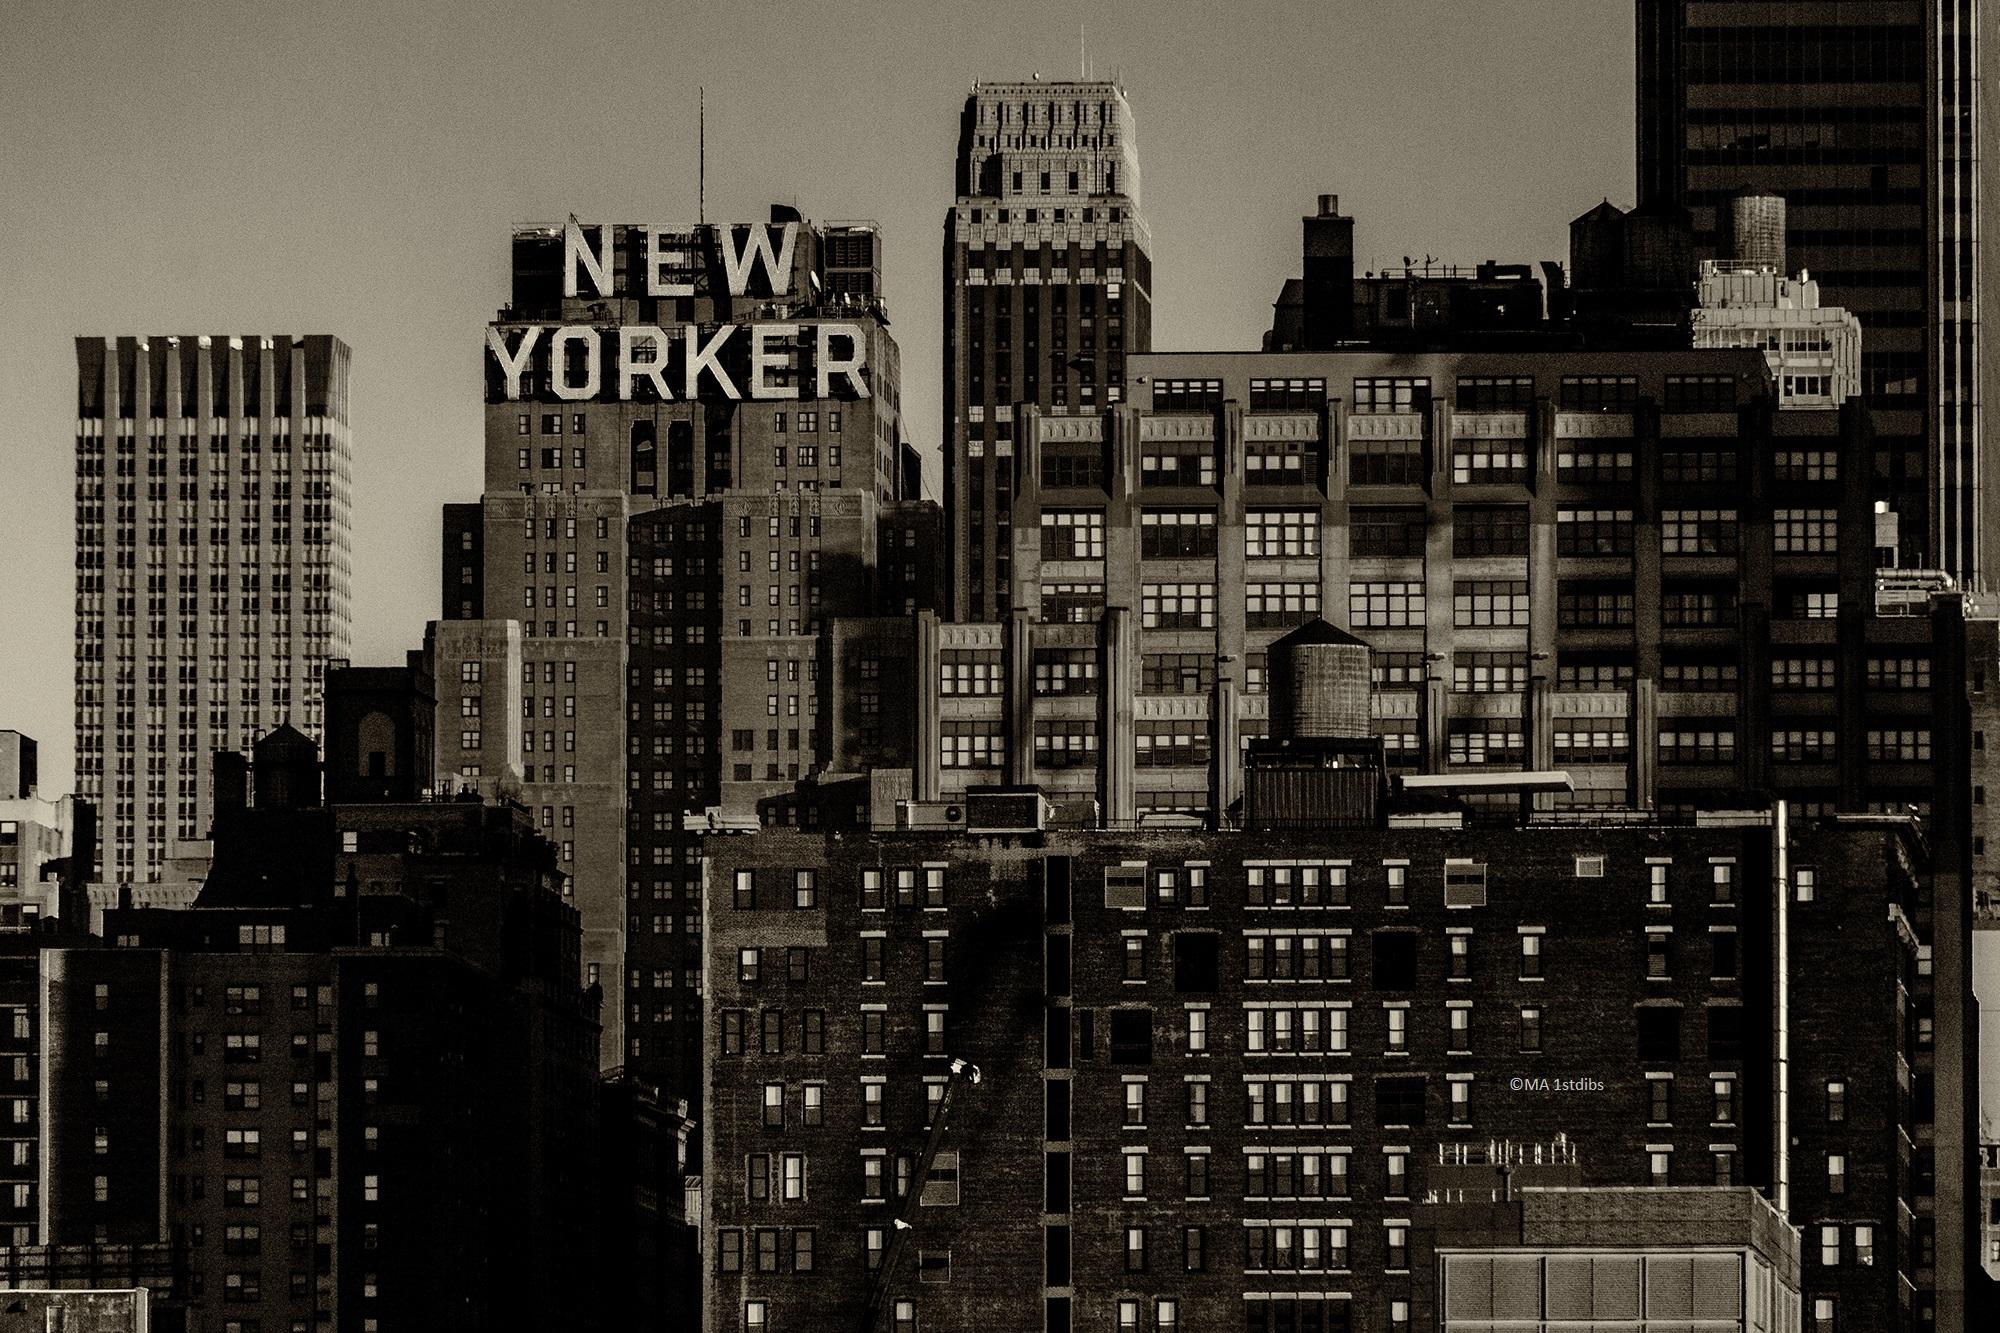 Alejandro Cerutti Black and White Photograph - New York City landscape photography - New Yorker - 24 x 36 in. acrylic facemount